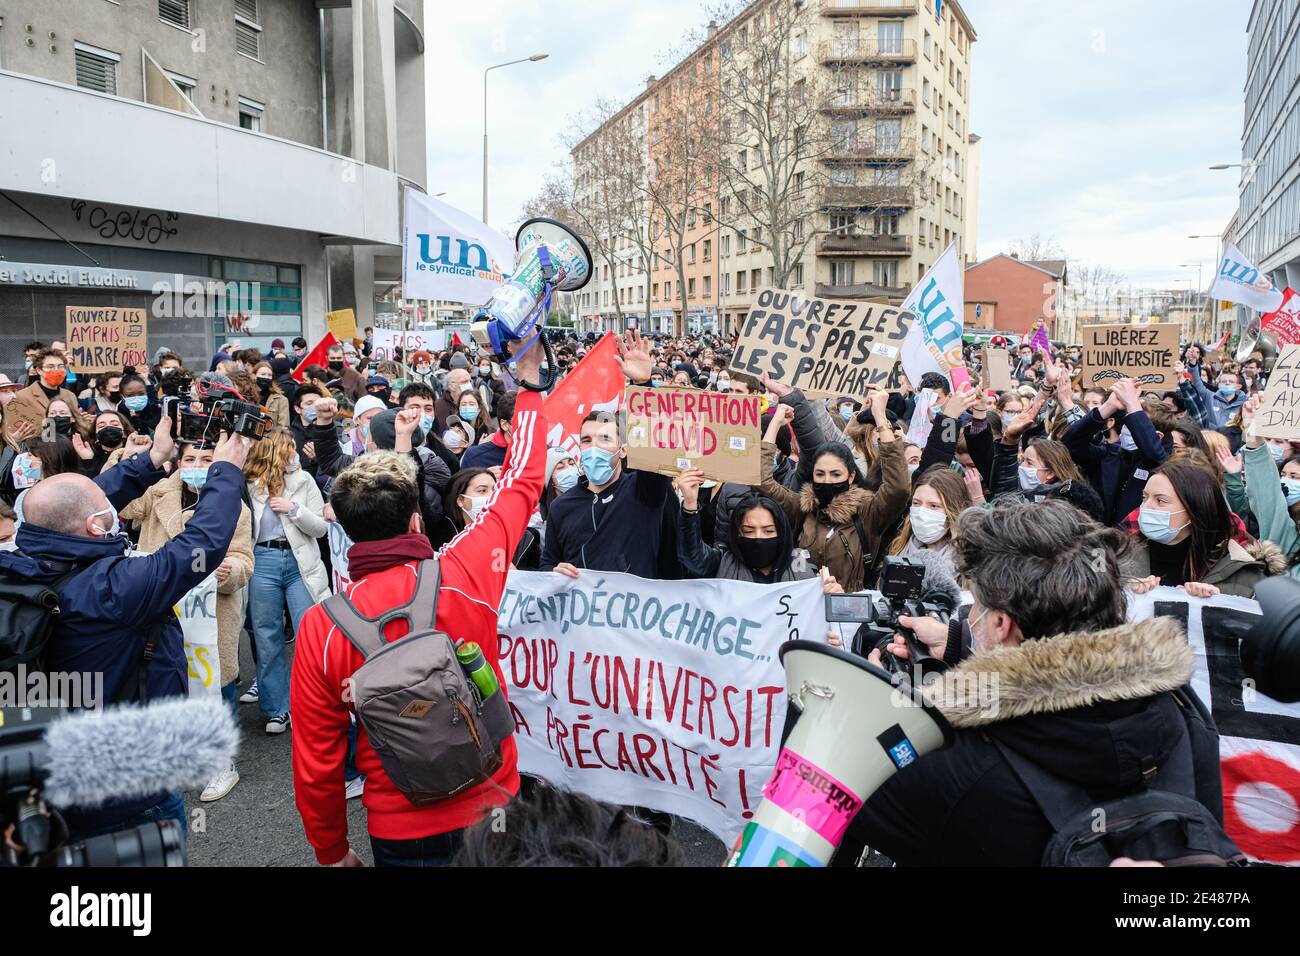 Lyon (France), 21 January 2021. Students demonstrated in the streets of Lyon. They denounced the distress, the isolation and the precariousness of the Stock Photo